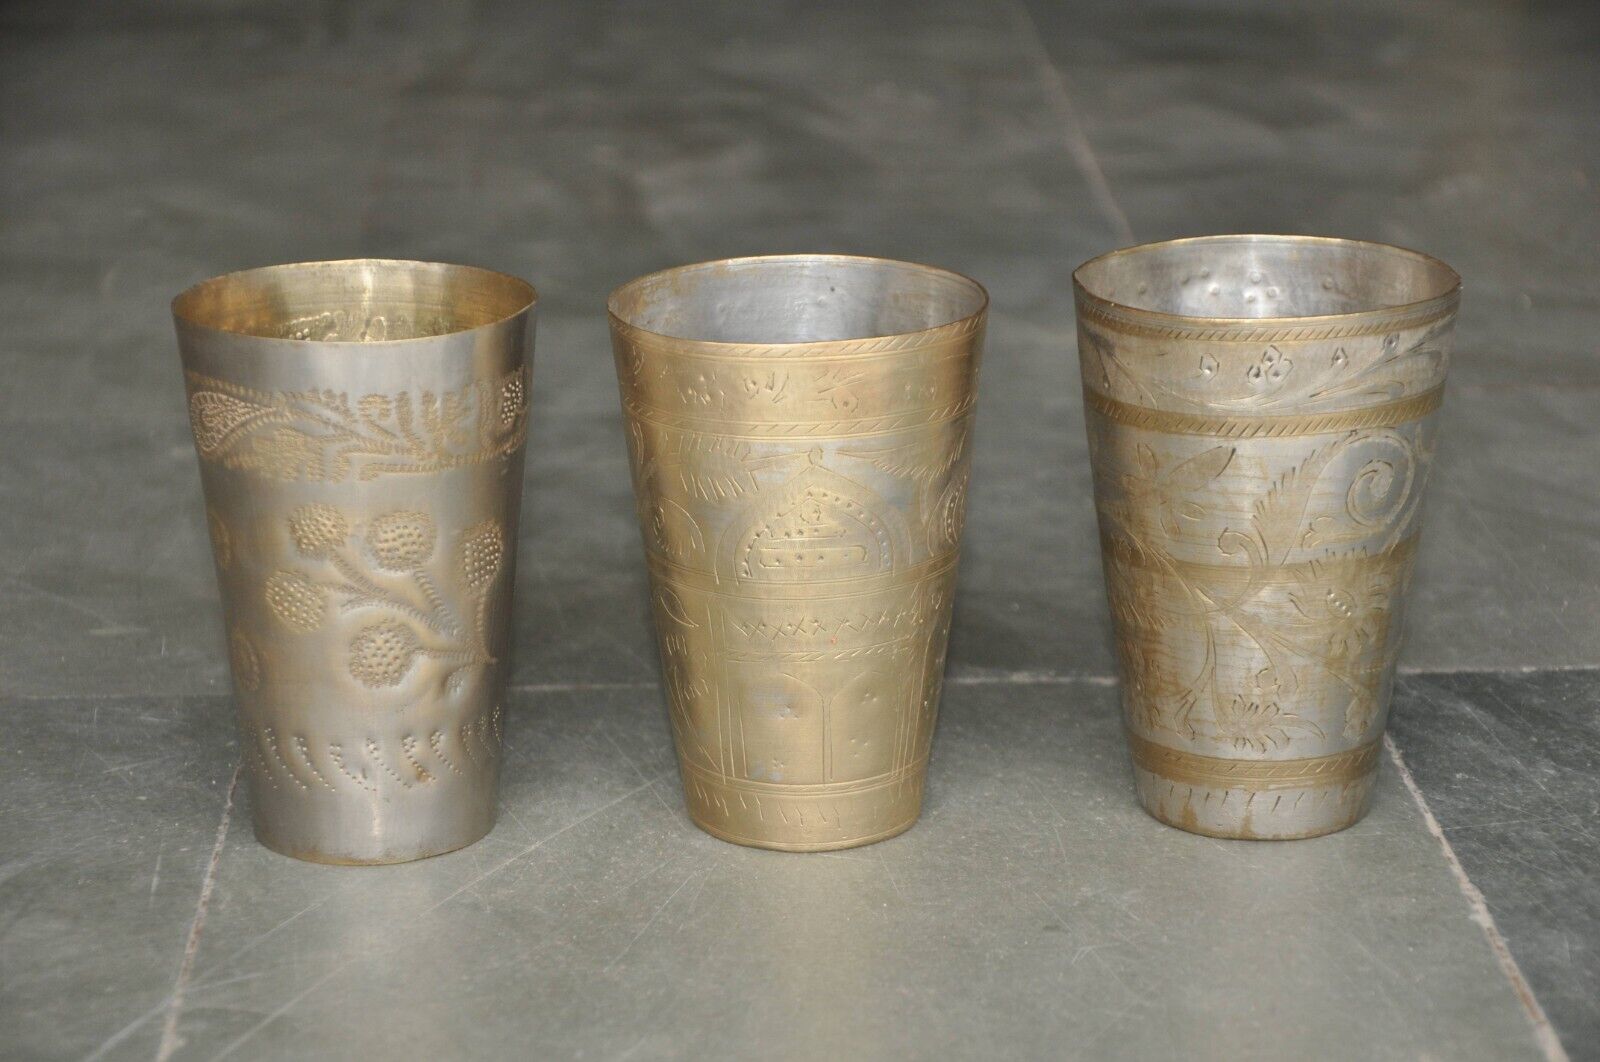 3 Pc Vintage Solid Heavy Handcrafted Inlay Engraved Brass Lassi / Milk Glasses